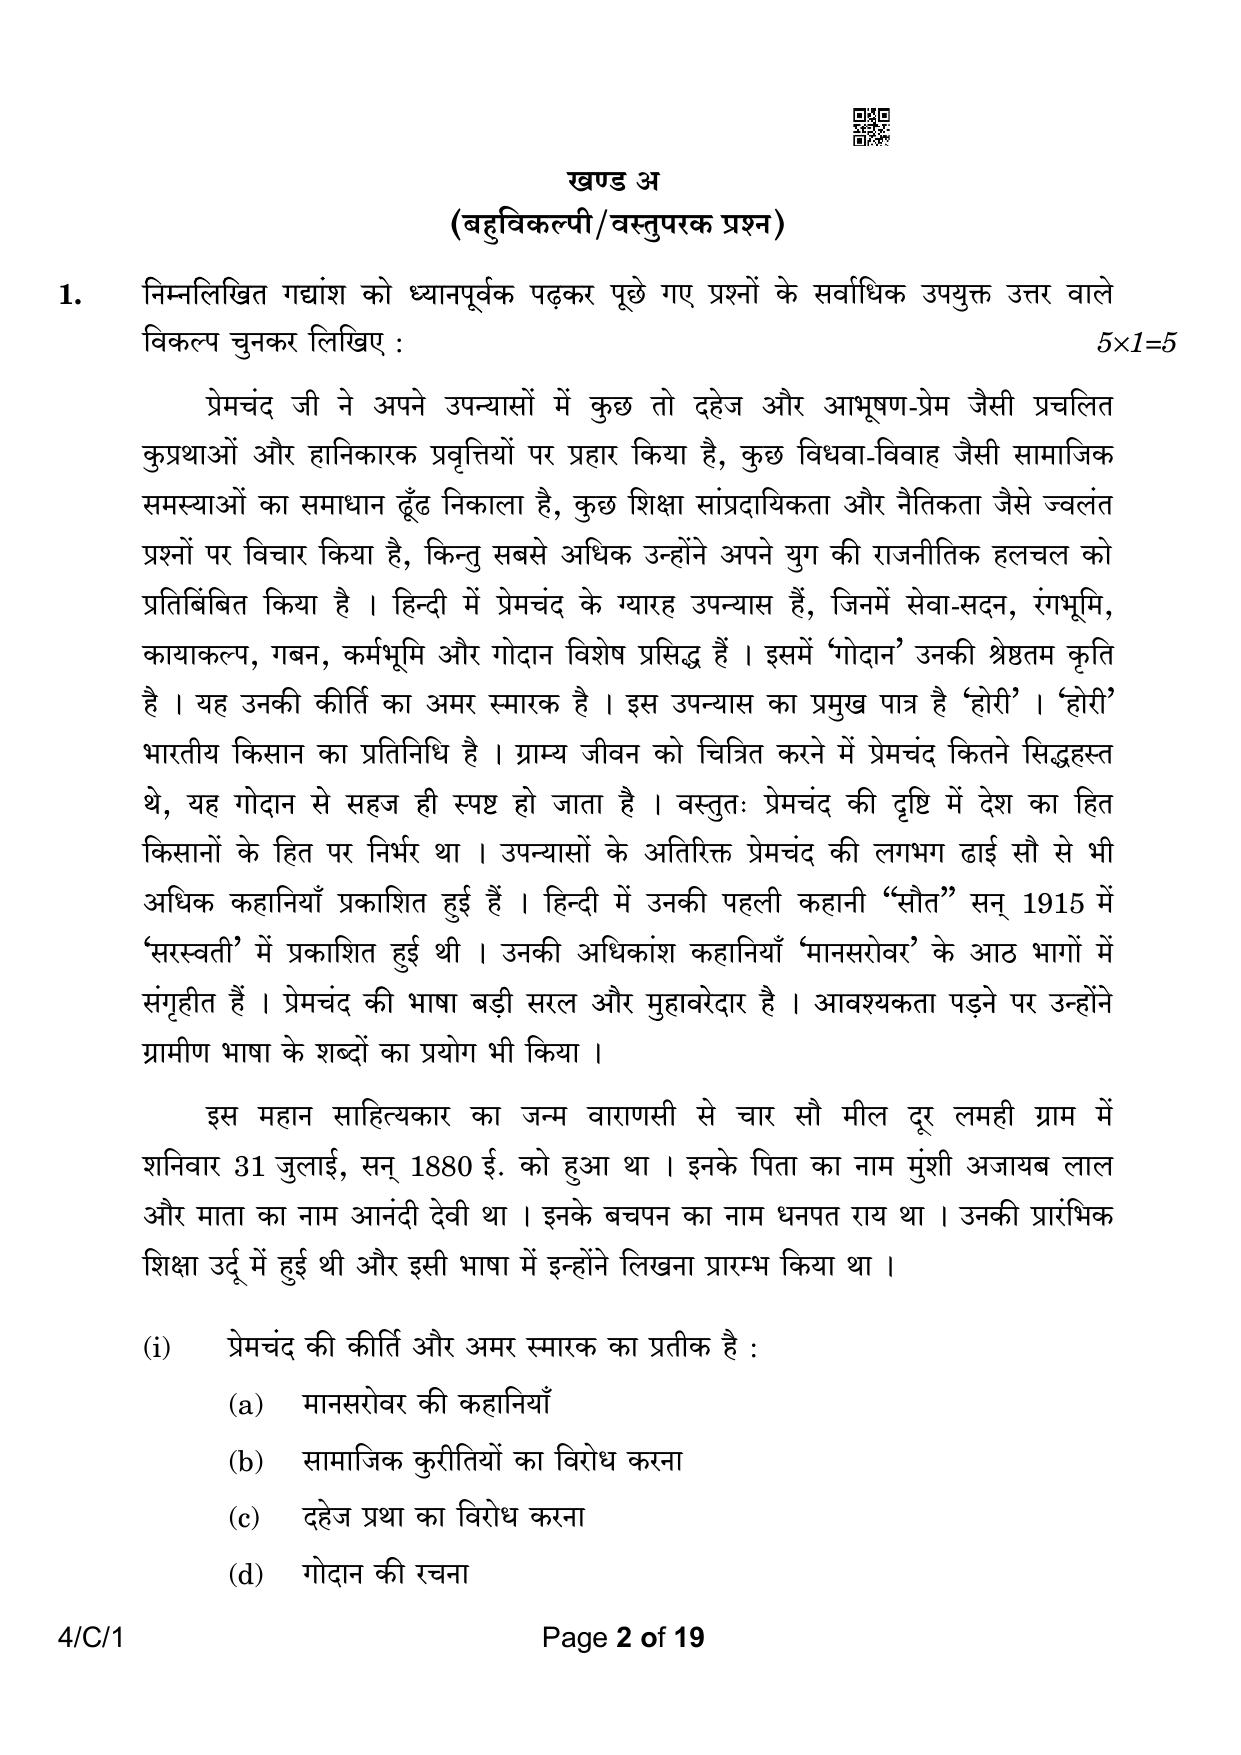 CBSE Class 10 4-1 Hindi B 2023 (Compartment) Question Paper - Page 2